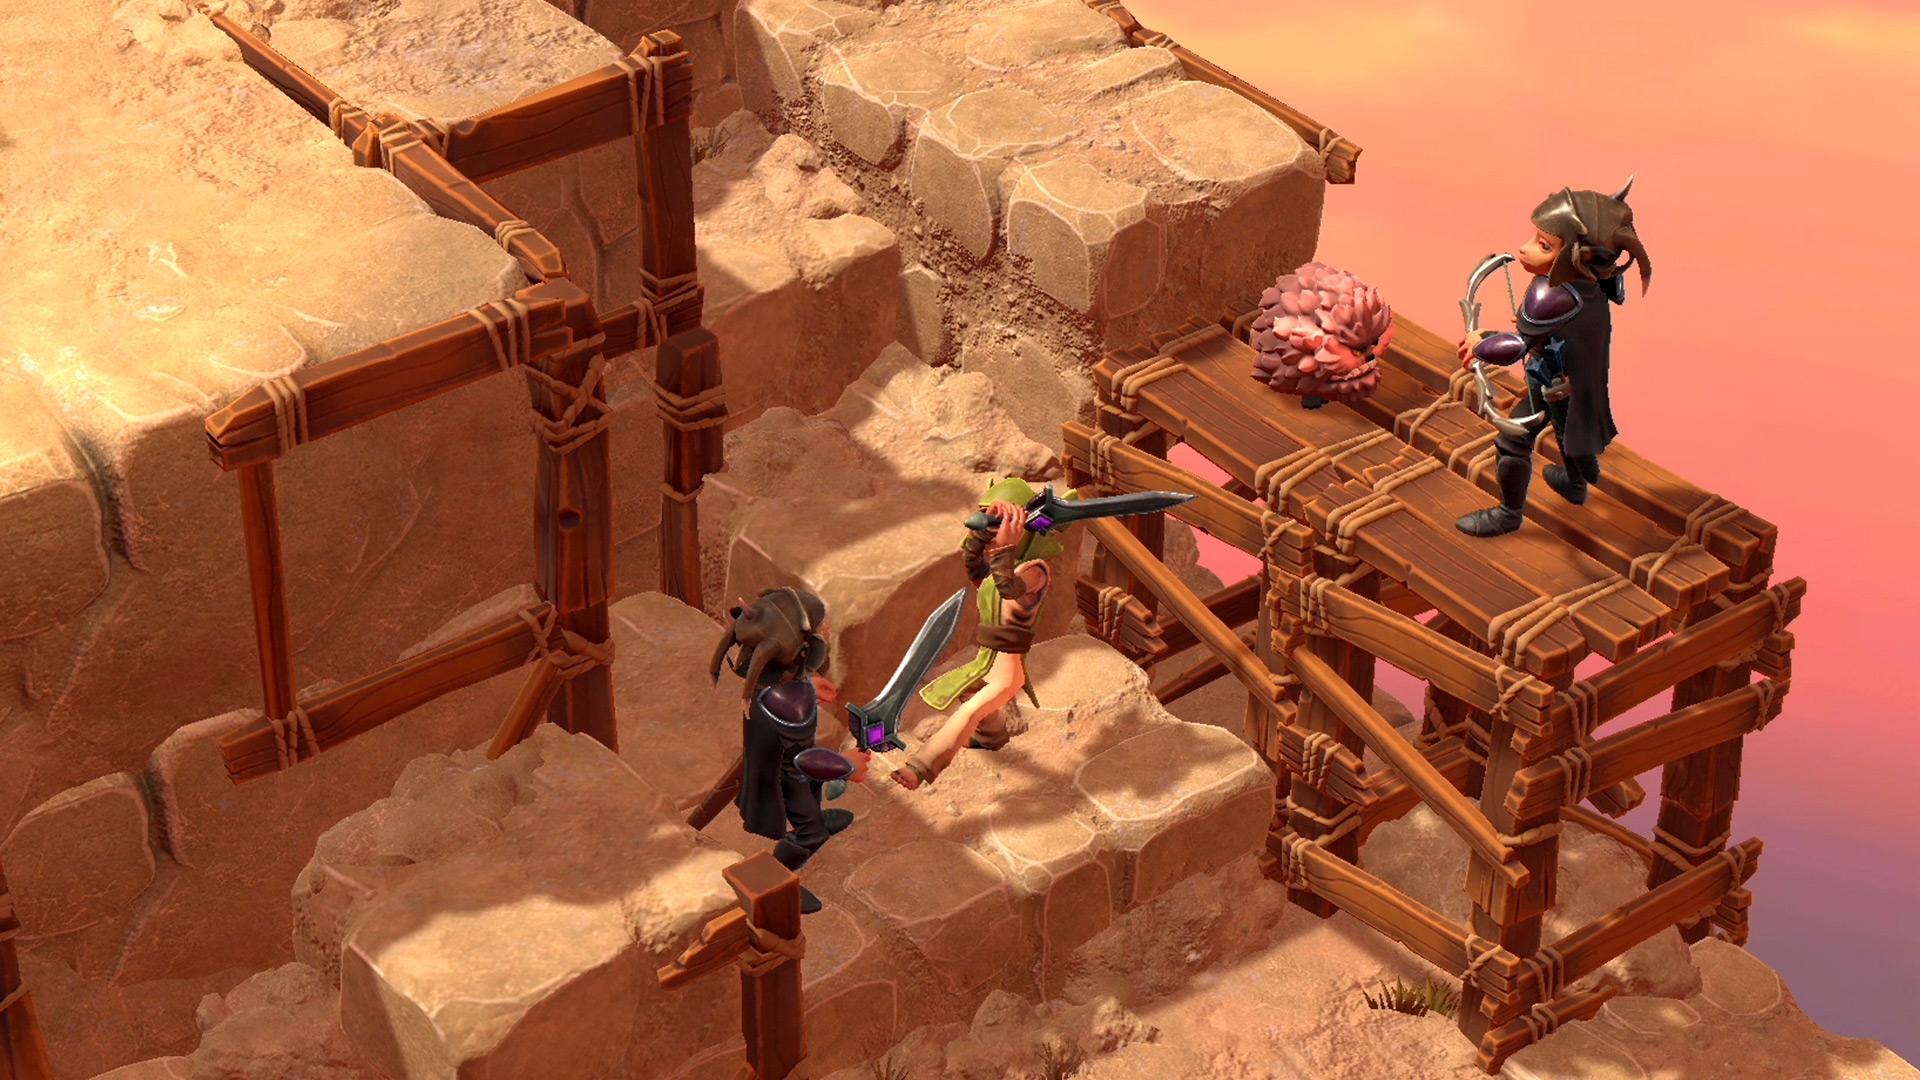 The Dark Crystal: Age of Resistance Tactics on Steam